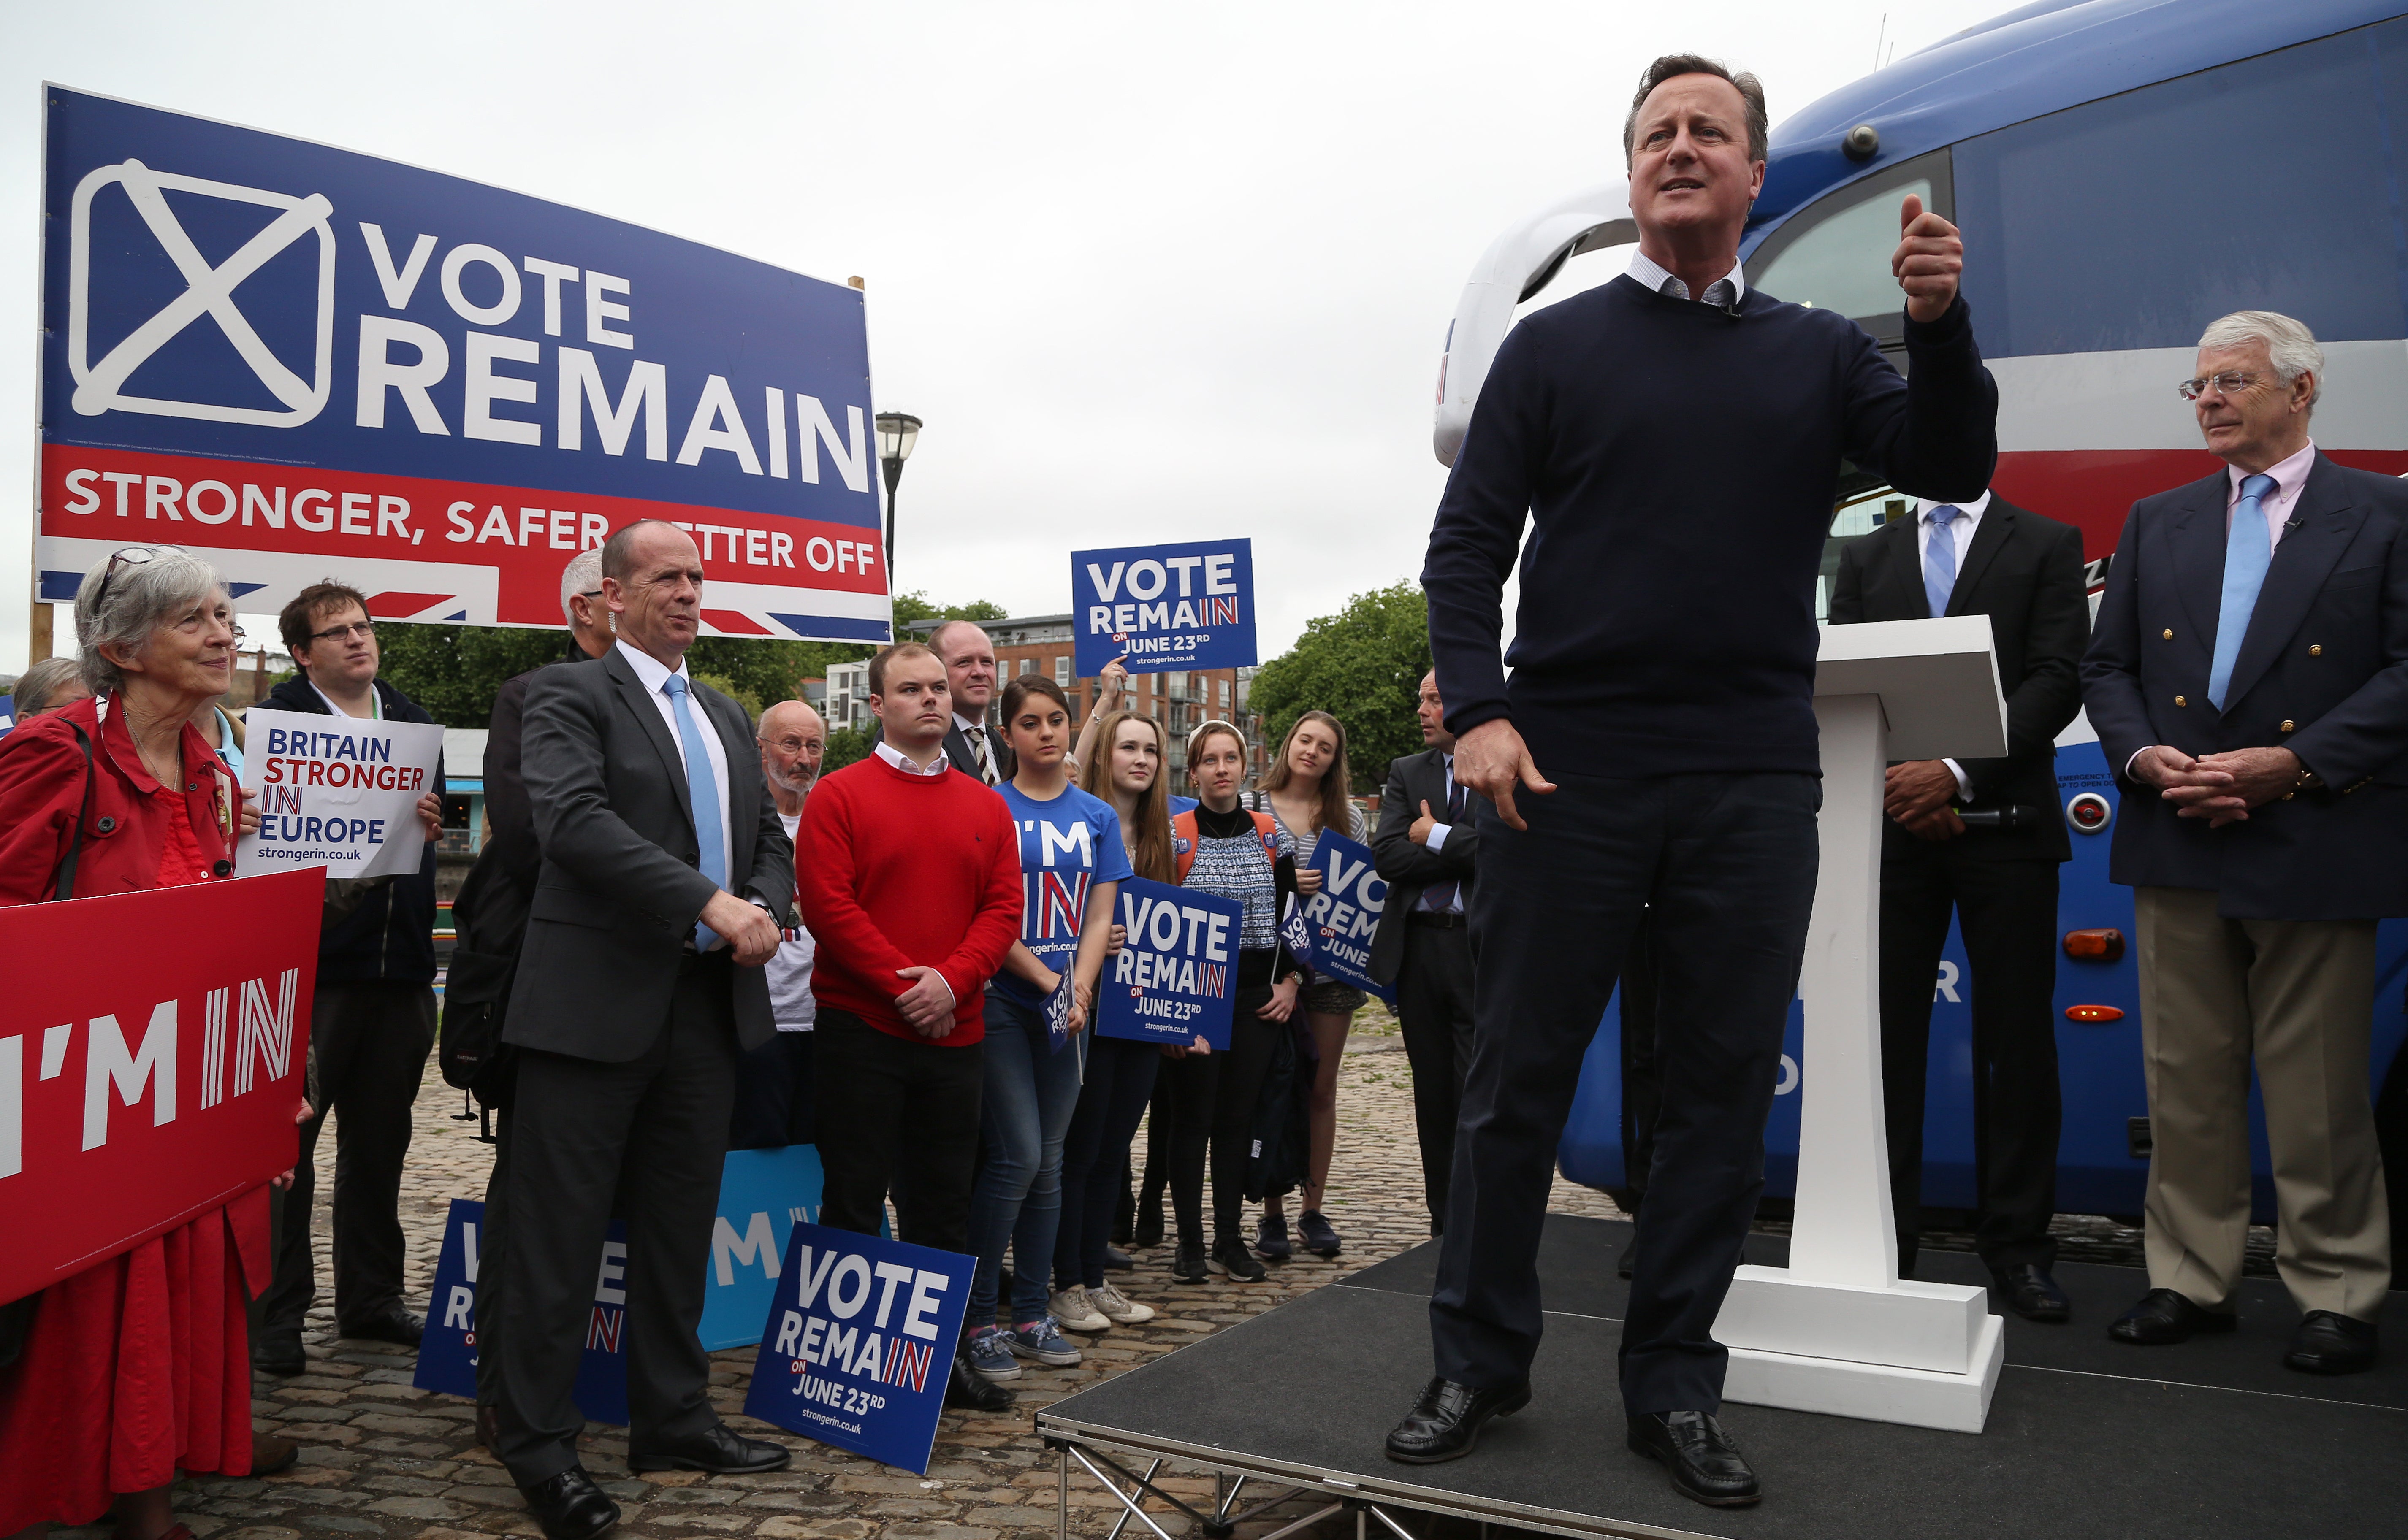 Cameron addresses pro-EU supporters during a rally in June 2016